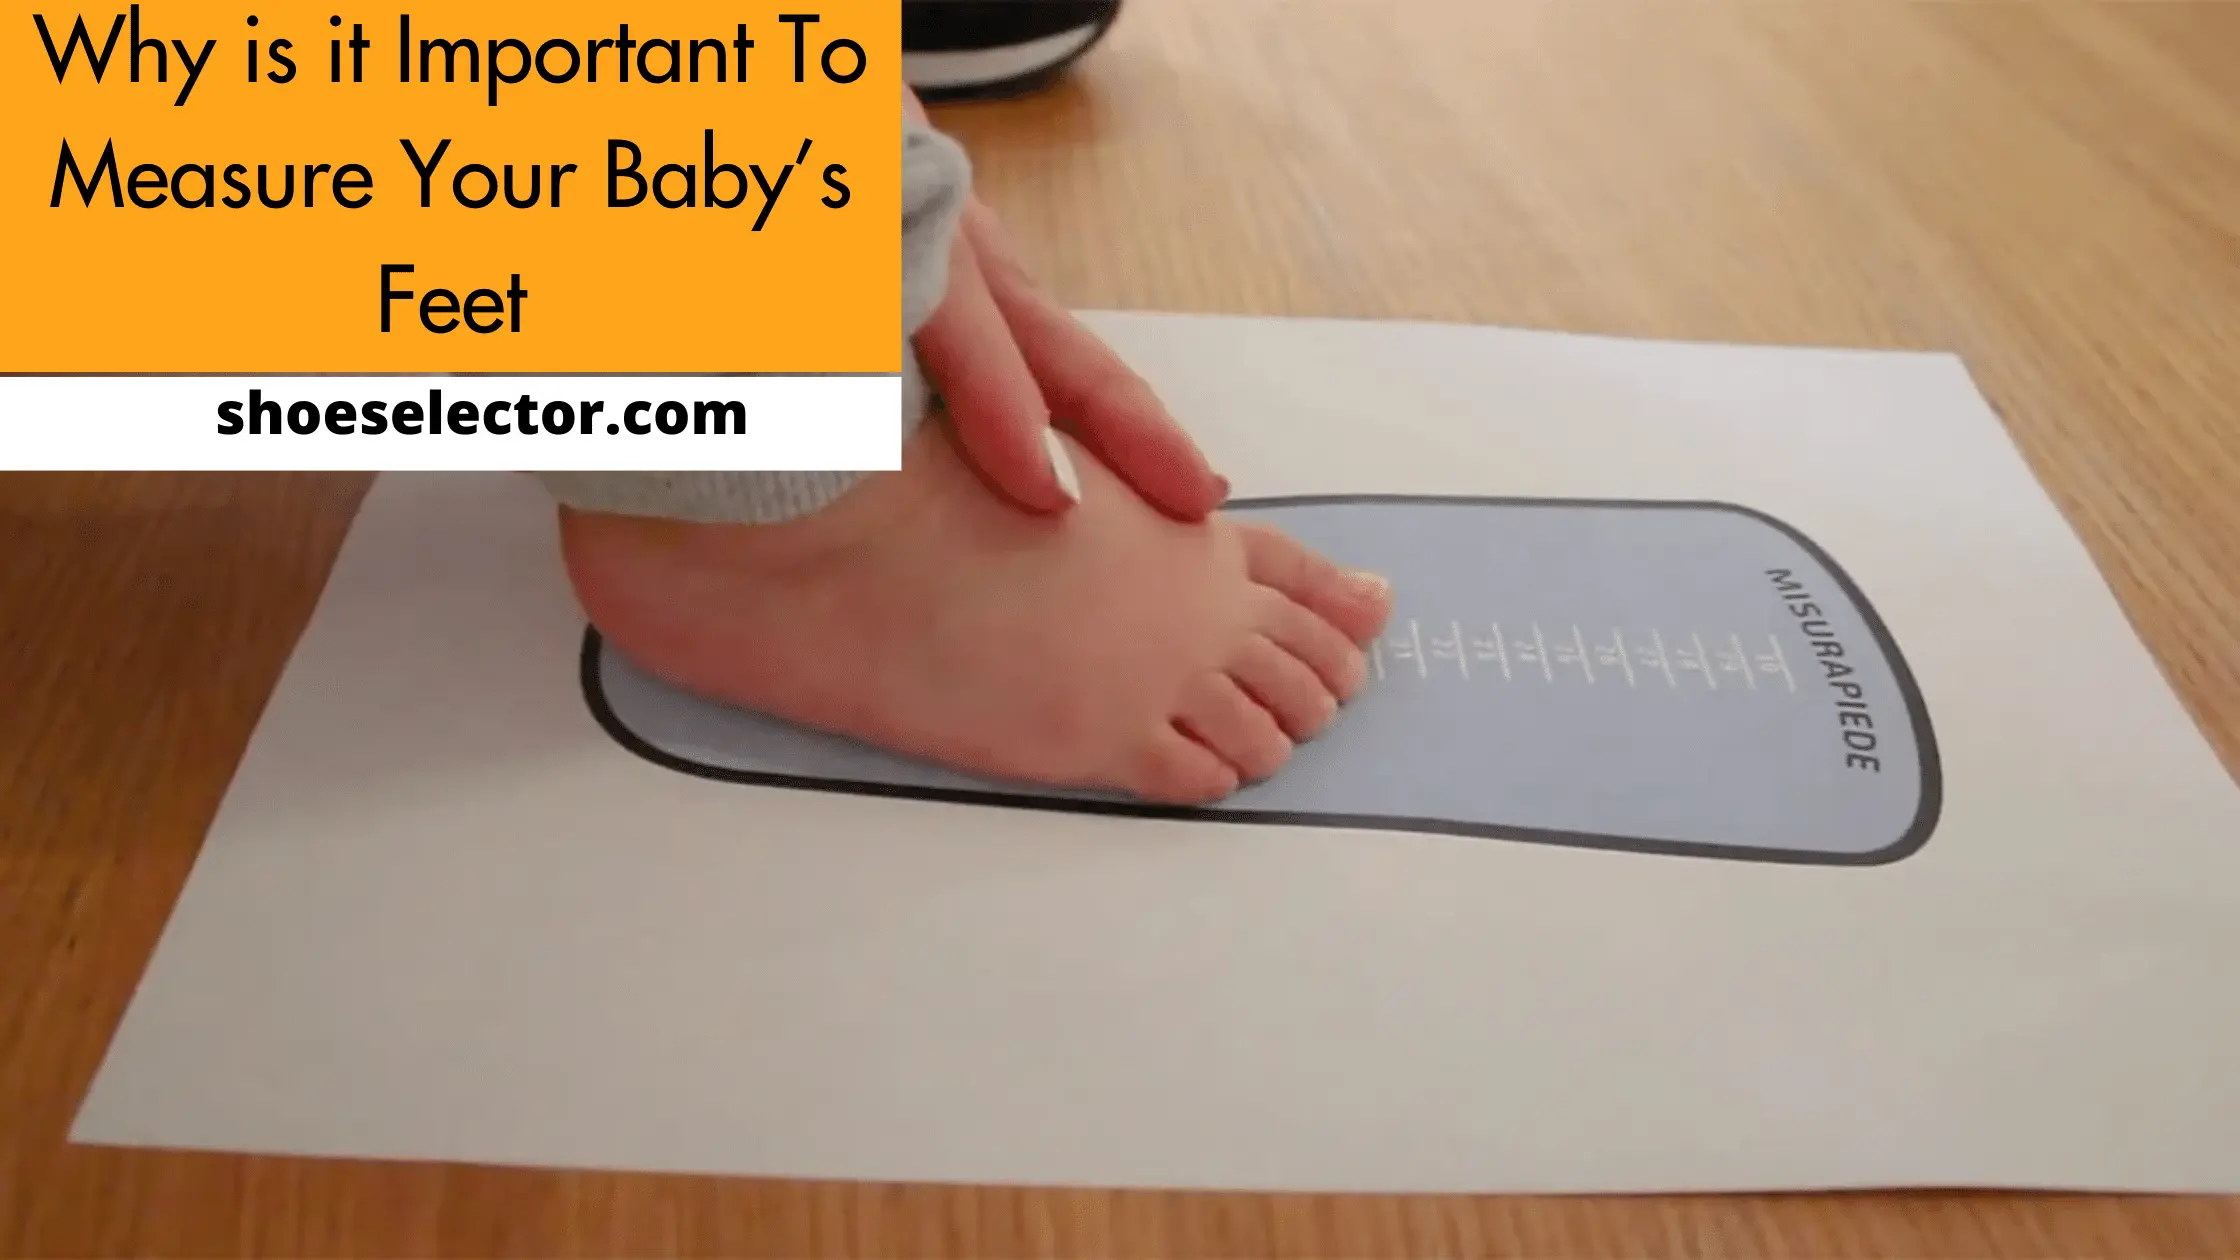 Why is it Important To Measure Your Baby’s Feet?